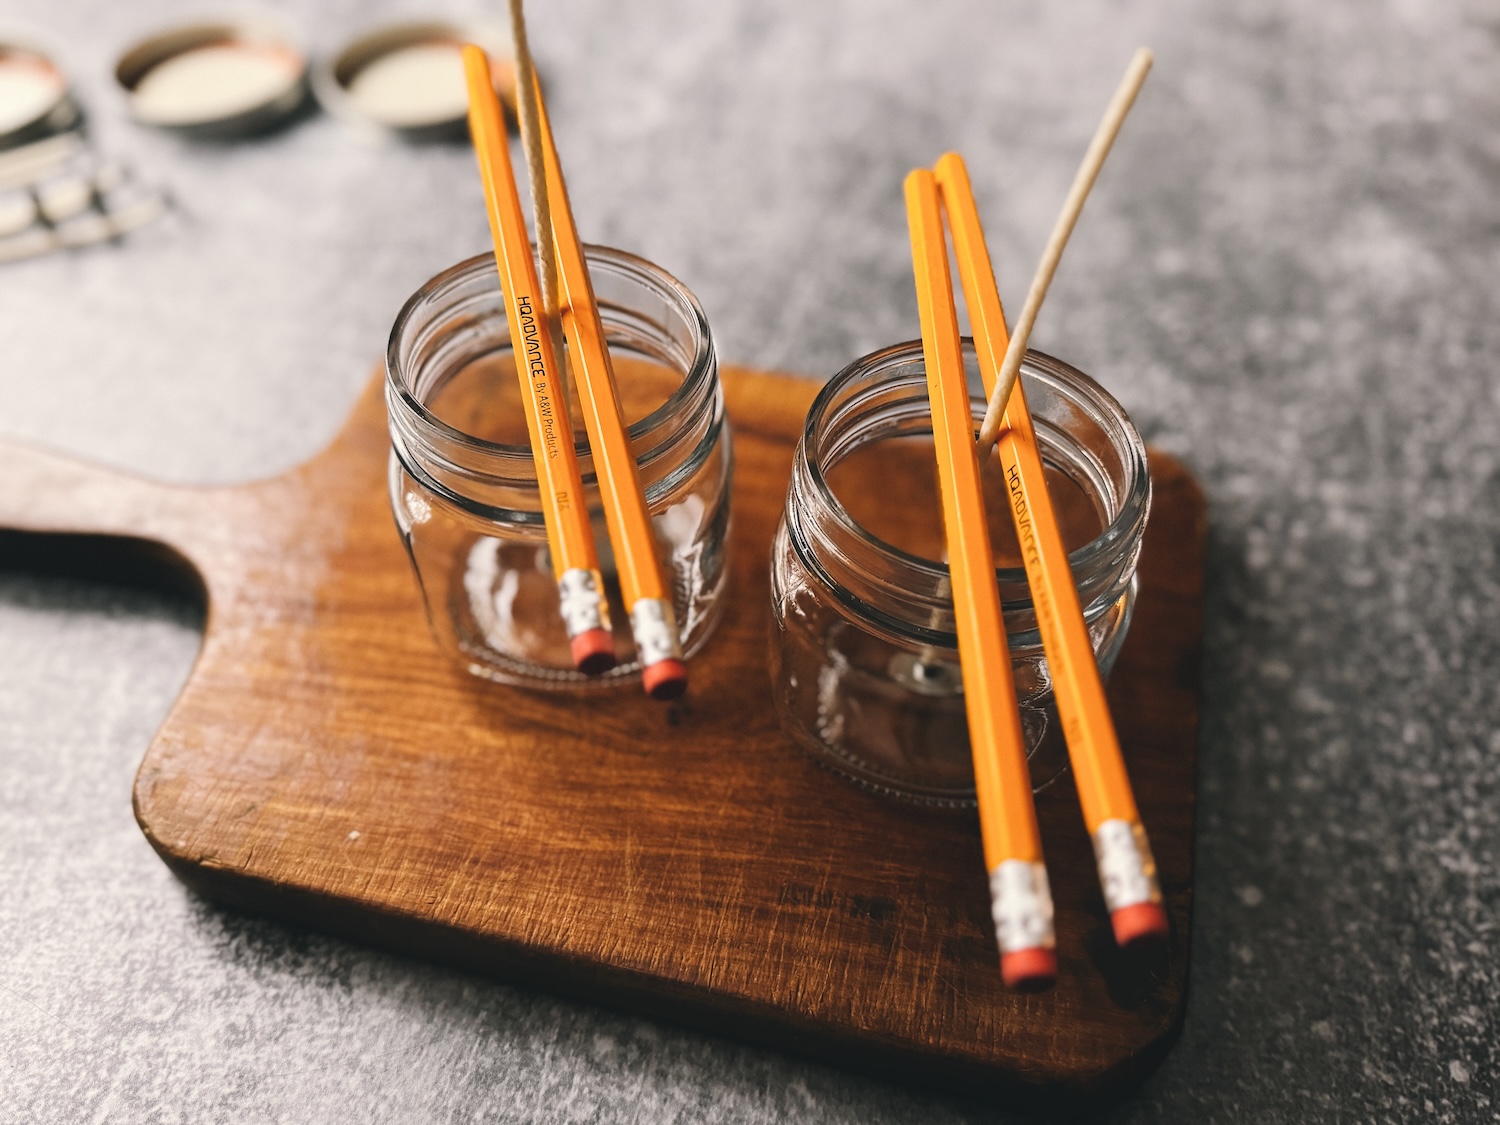 A photo showing candle wicks suspended in empty glass jars and being held in place with 2 pencils